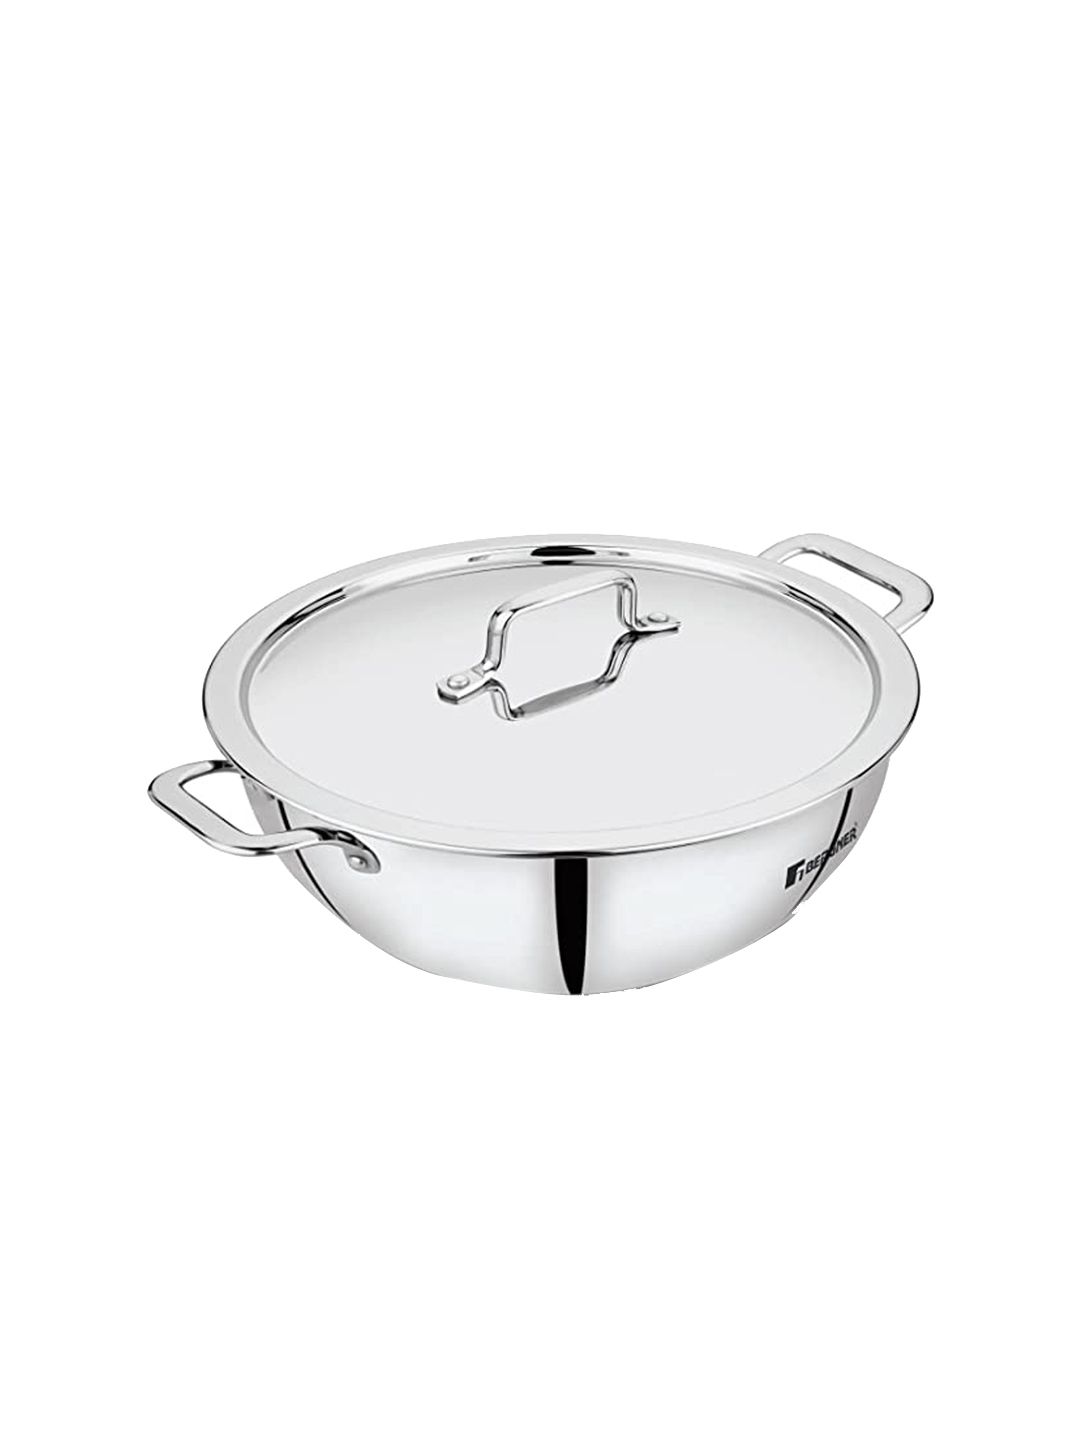 BERGNER Silver-Toned Solid Tripro Triply Stainless Steel Kadhai with Lid Price in India